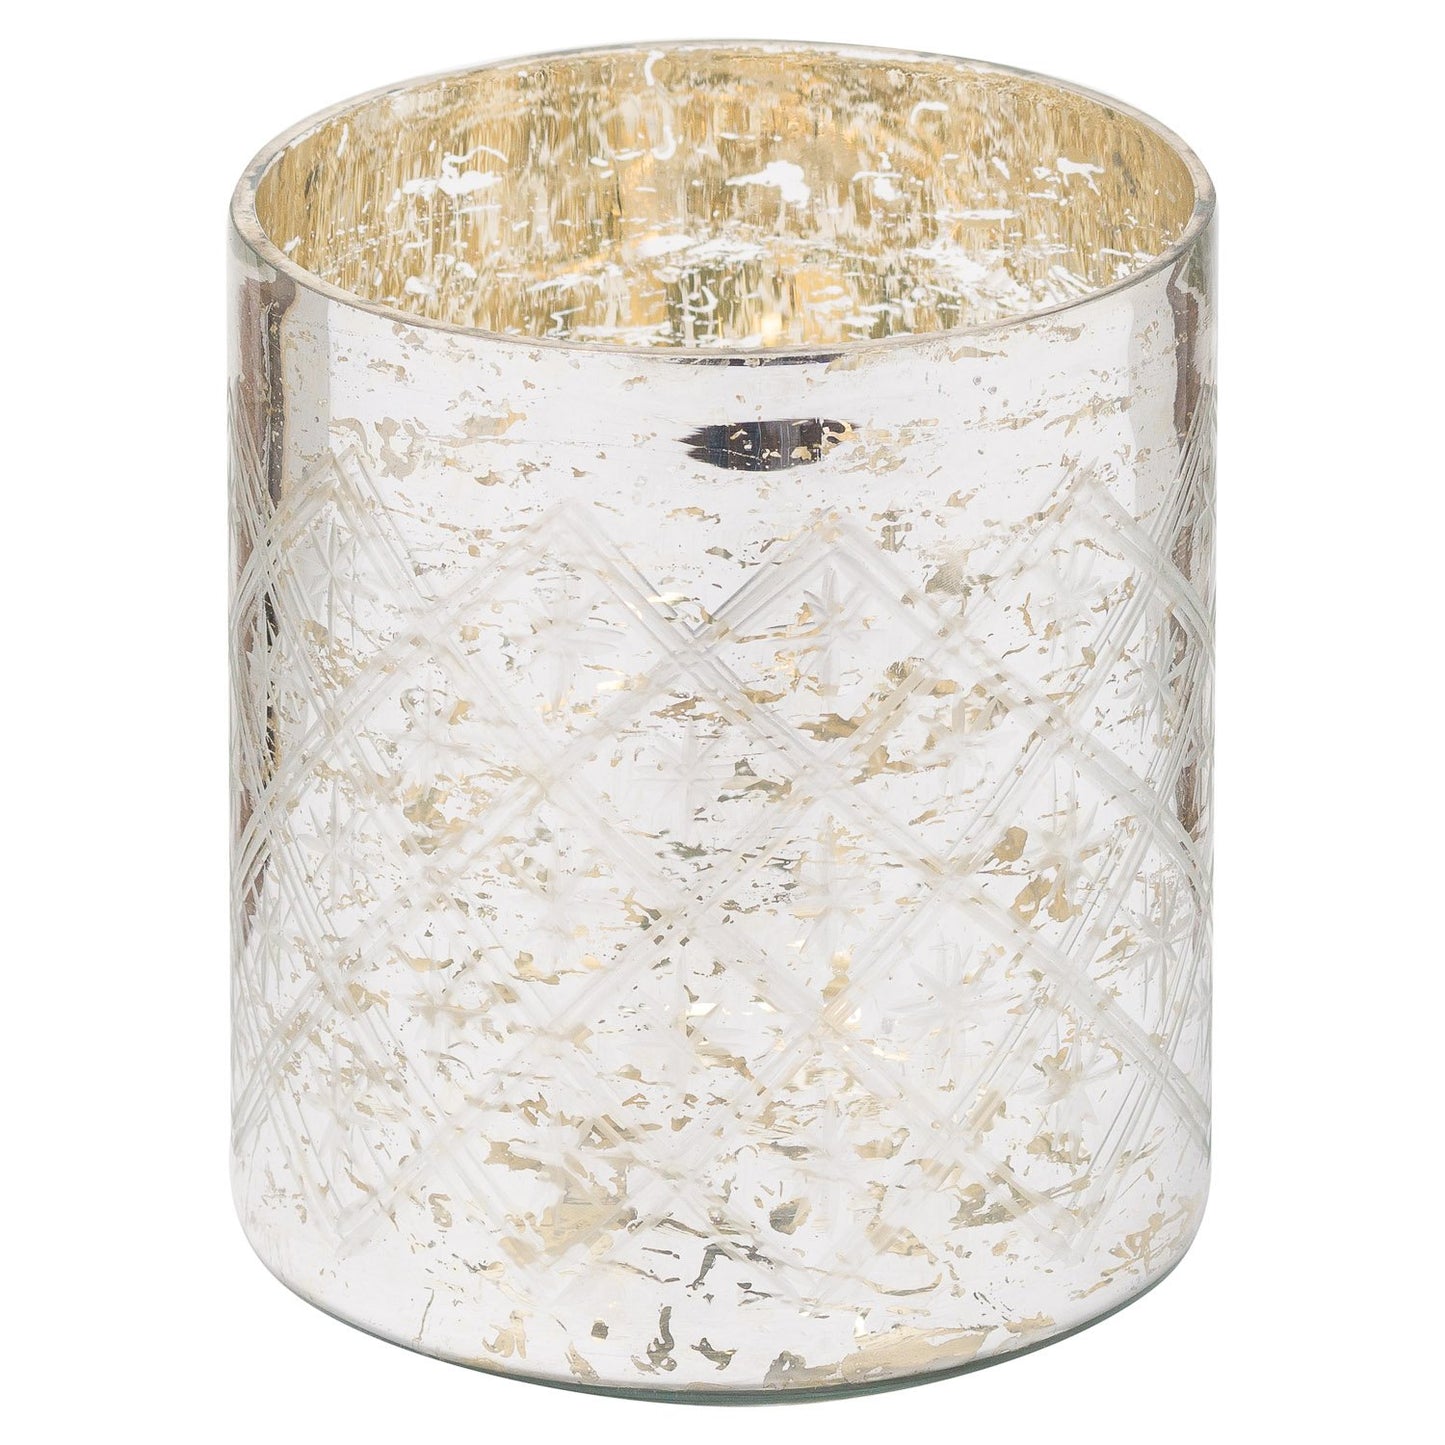 The Noel Collection Silver Foil Effect Pillar Candle Holder